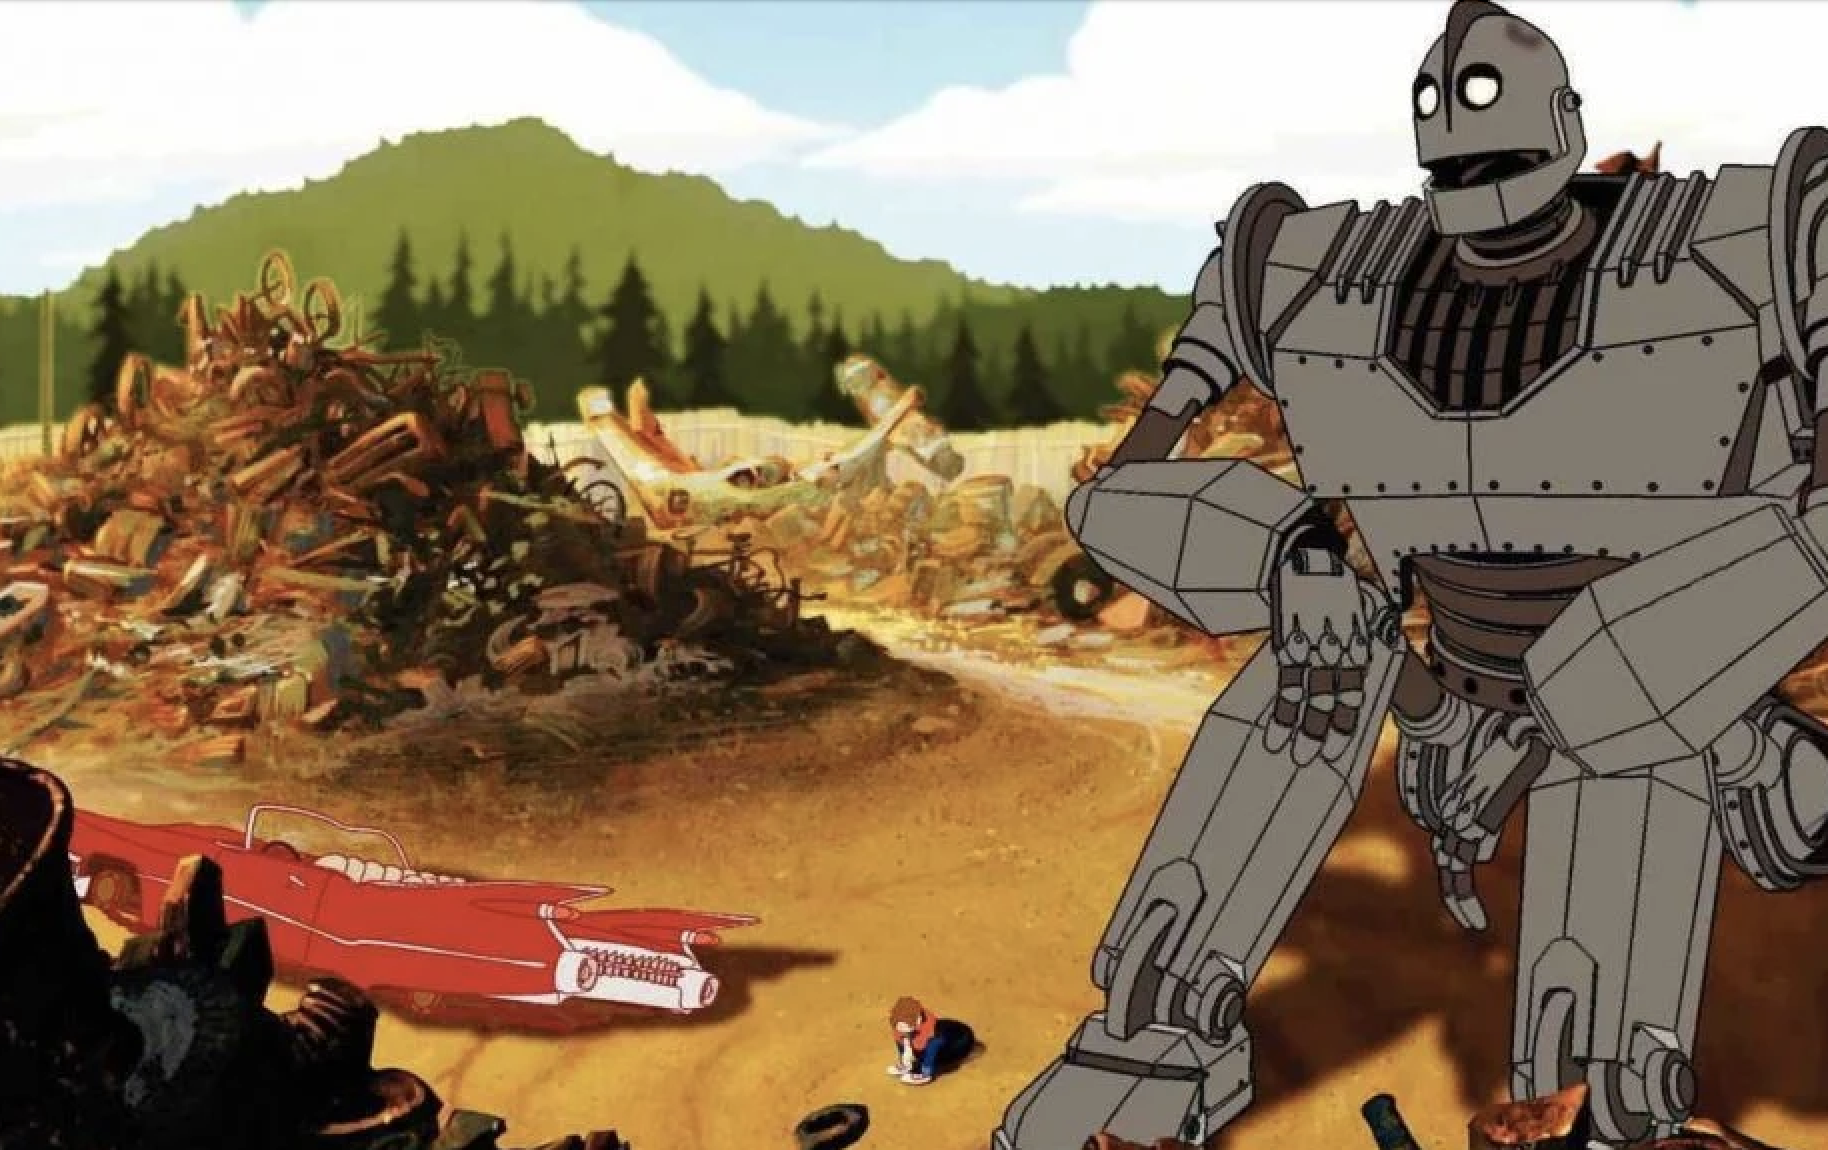 Screenshot from The Iron Giant